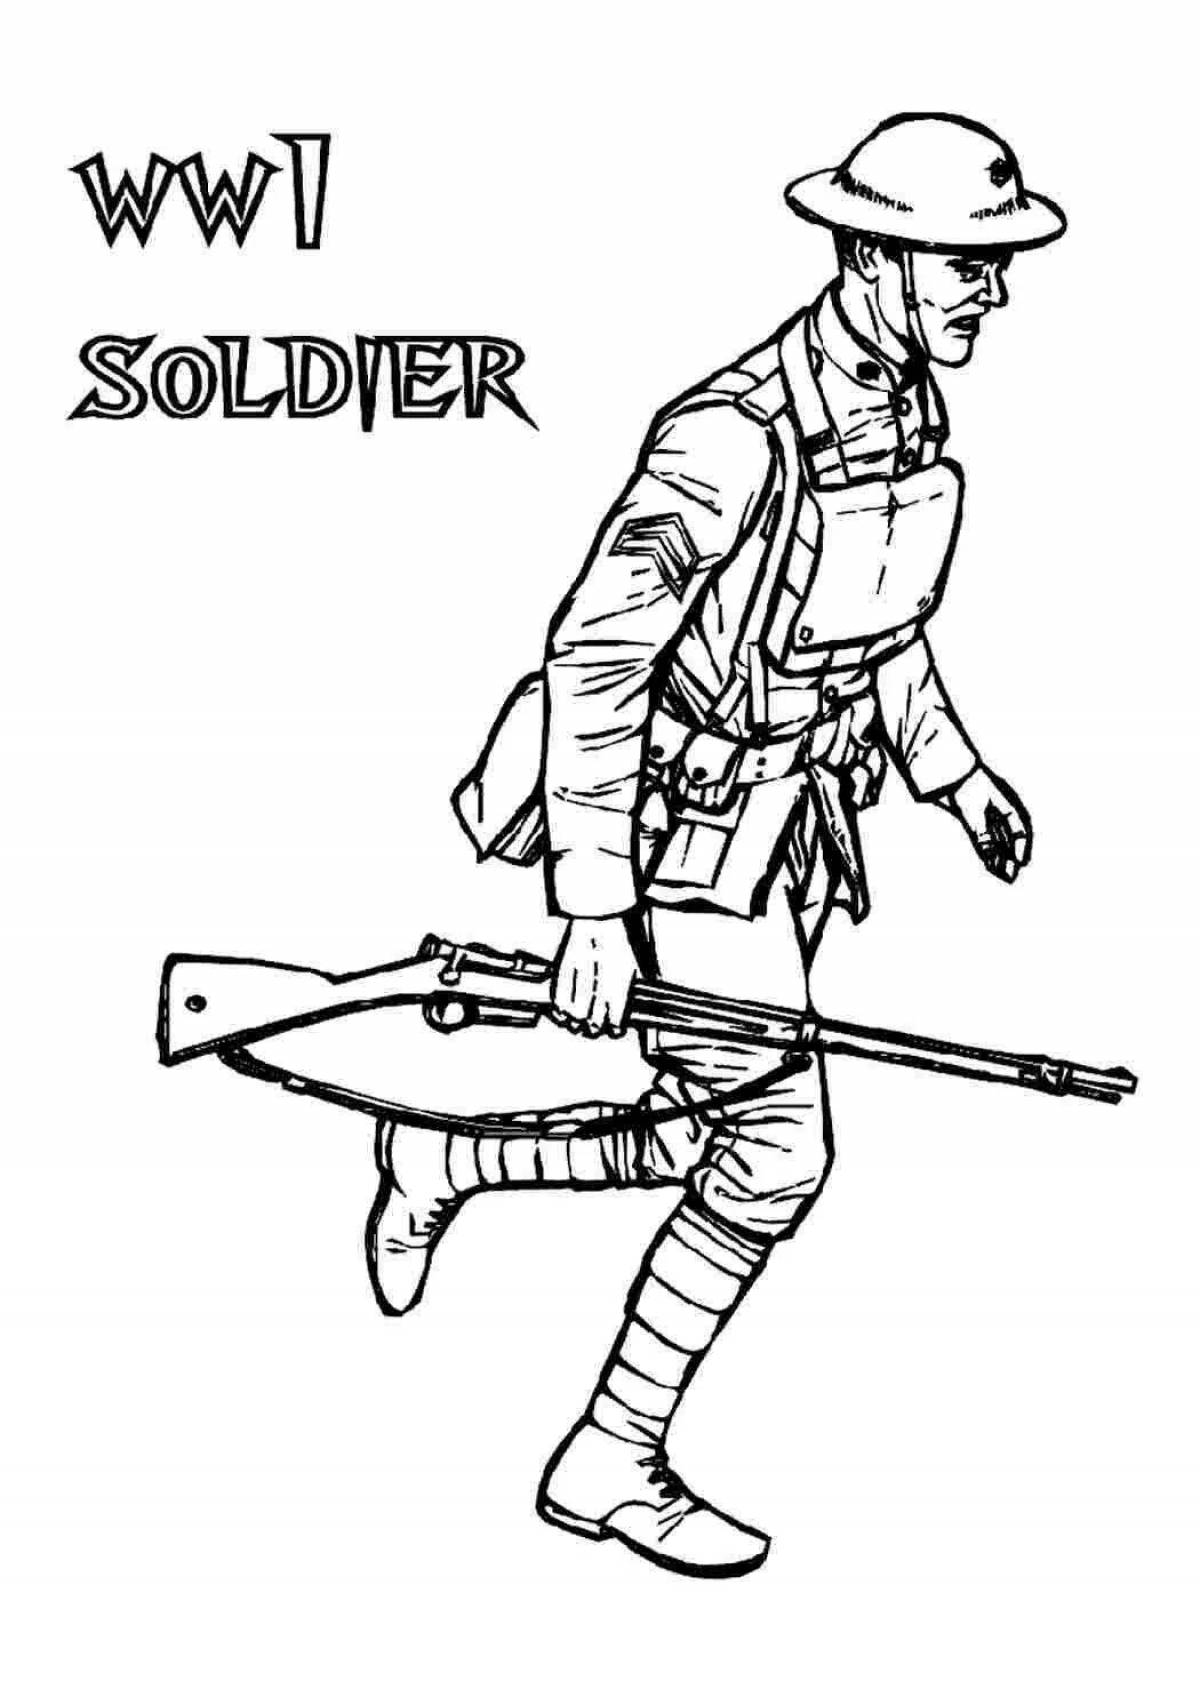 Fun toy soldier coloring book for boys